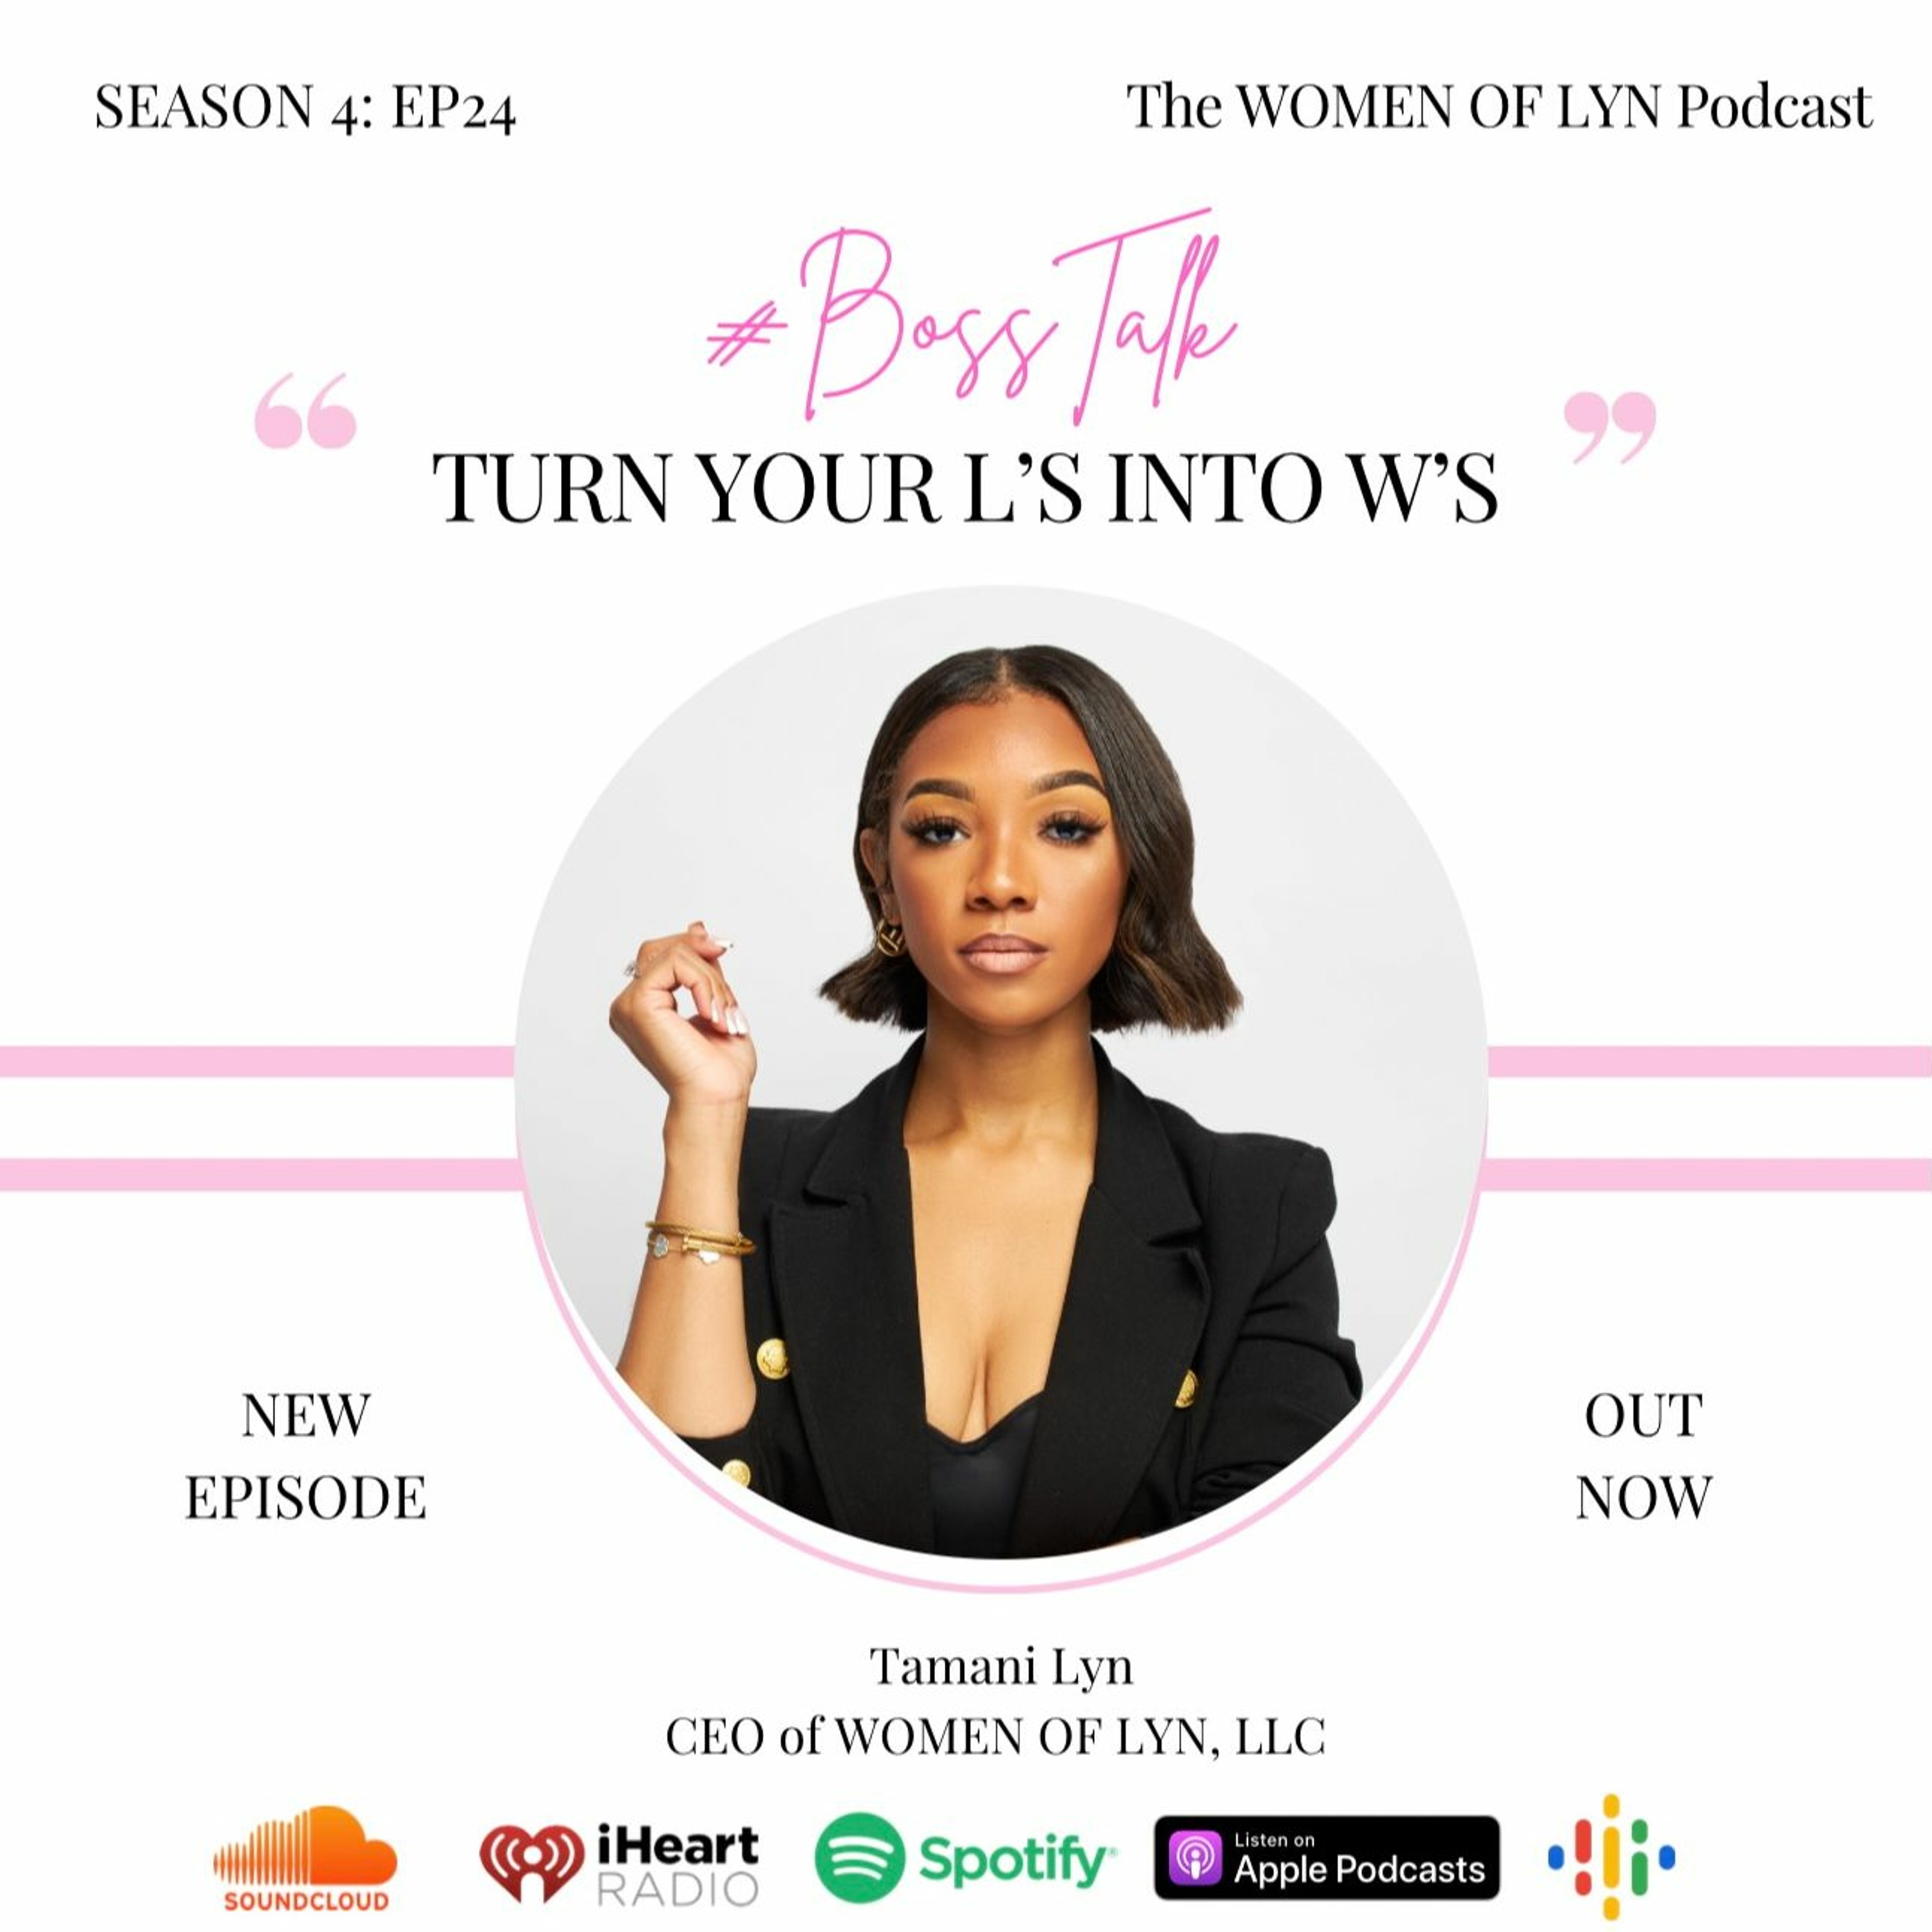 Episode 24: ”Turn Your L’s into W’s”